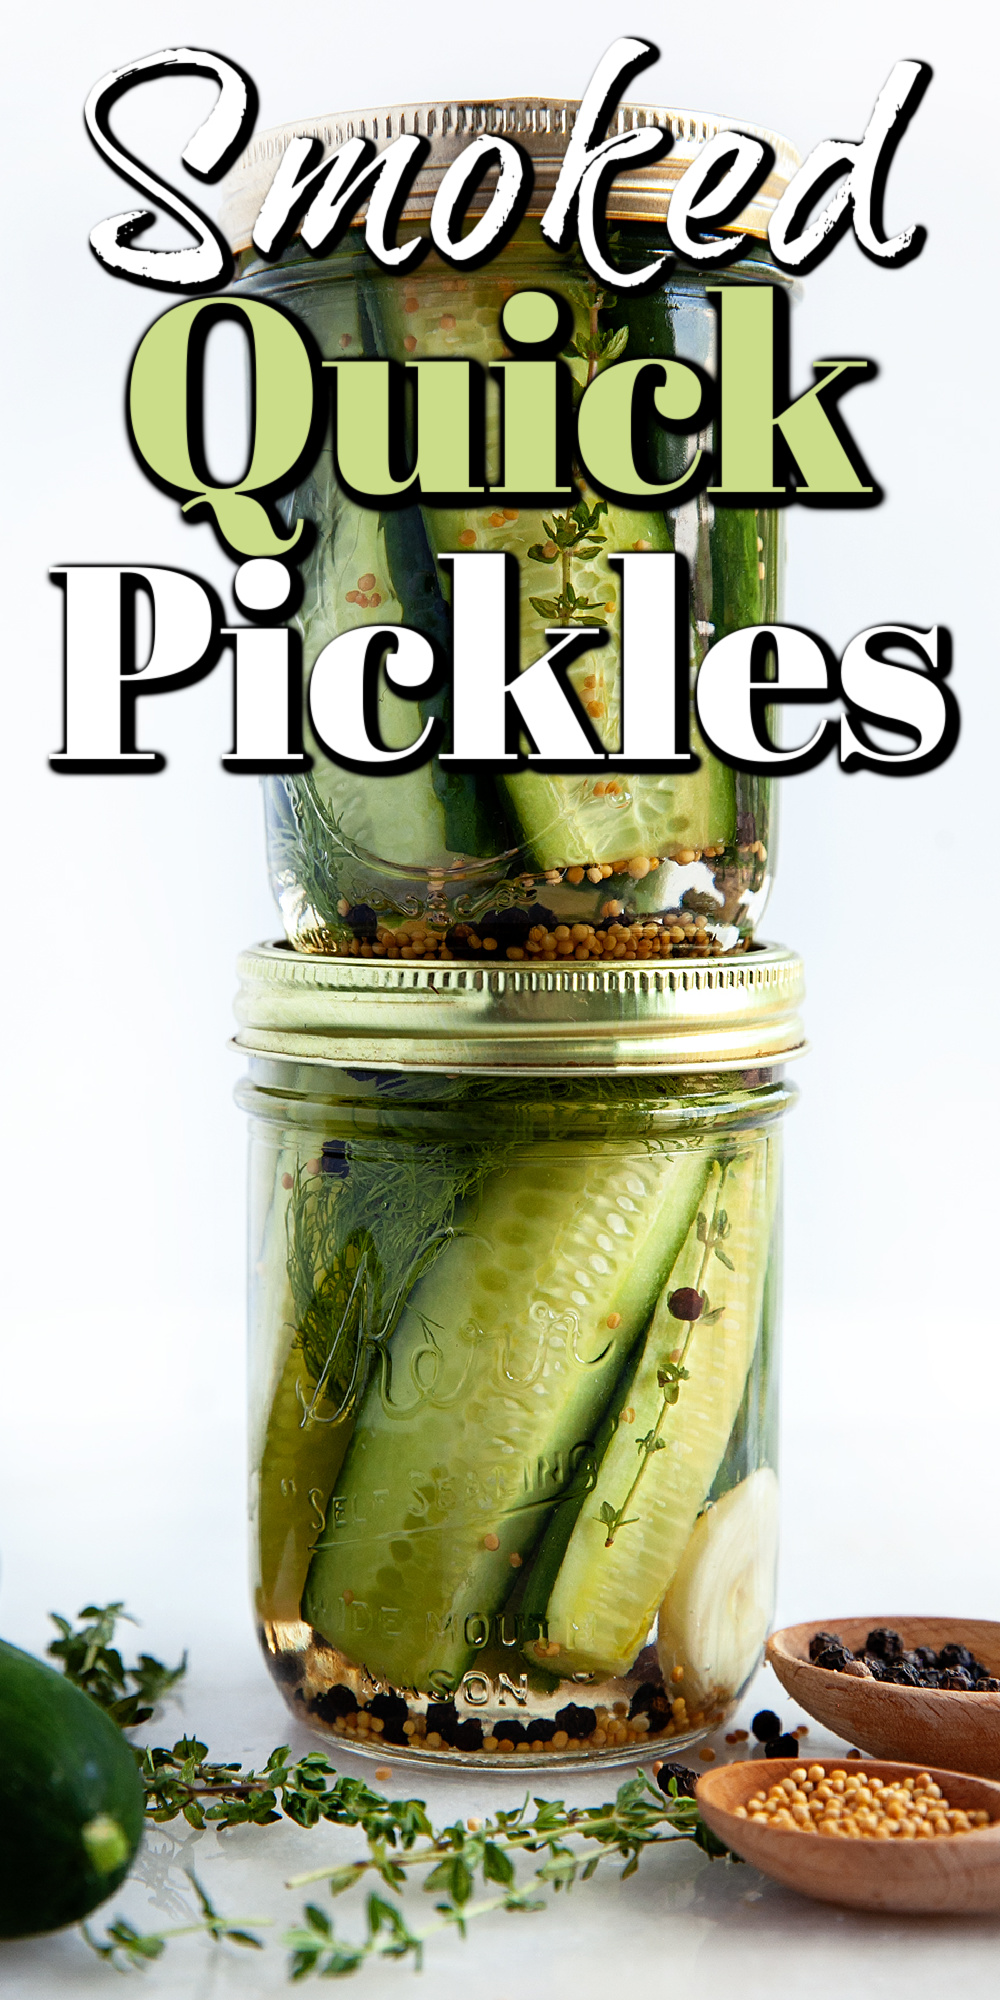 These smoked quick pickles are the perfect snack right out of the jar! They are also great on burgers or as a side for any sandwich!